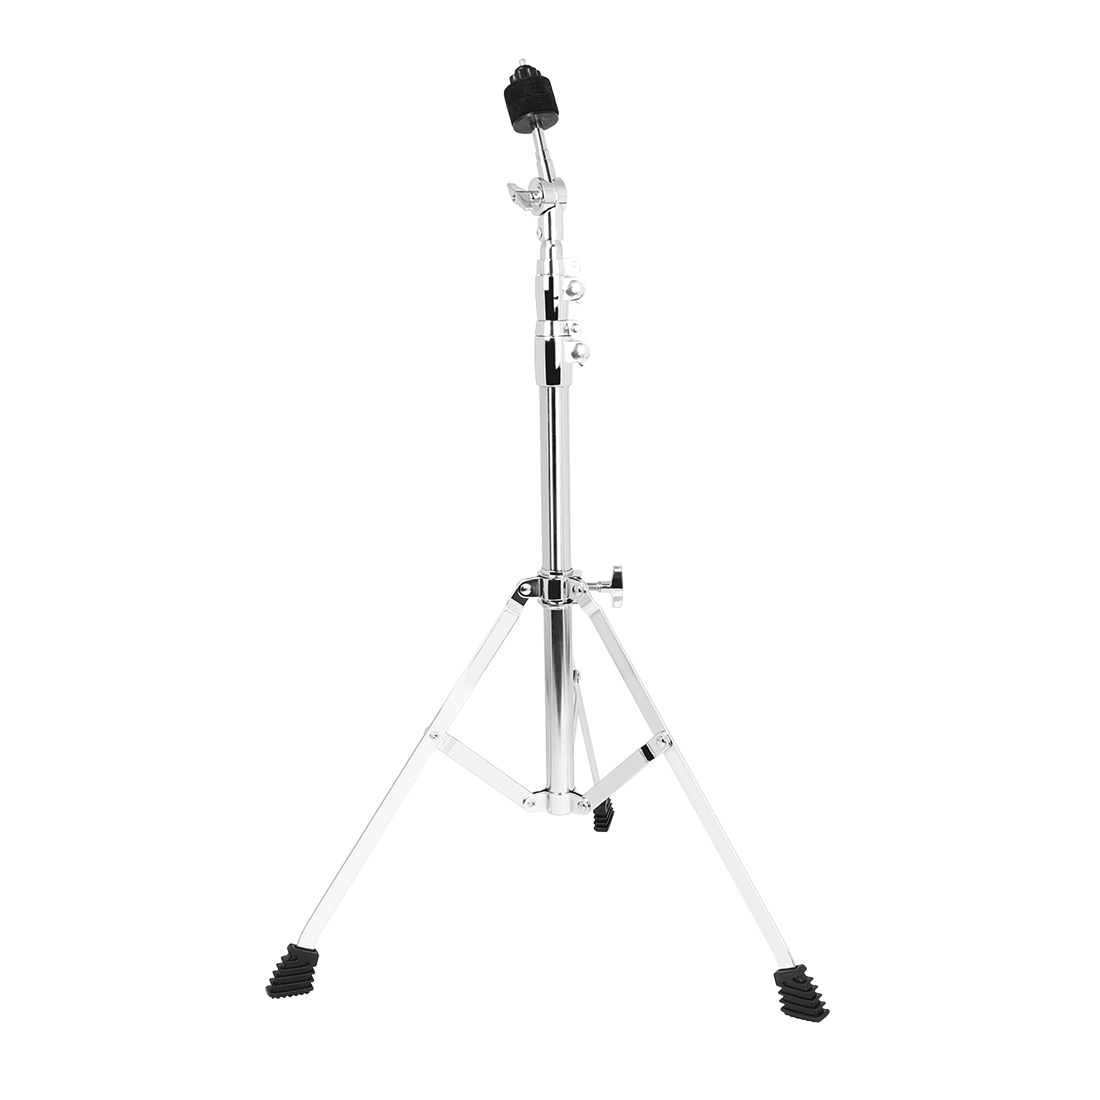 Full Metal Adjustment Foldable Floor Cymbal Triangle-bracket Stand Holder Jazz Drum Set Percussion Instrument Accessories